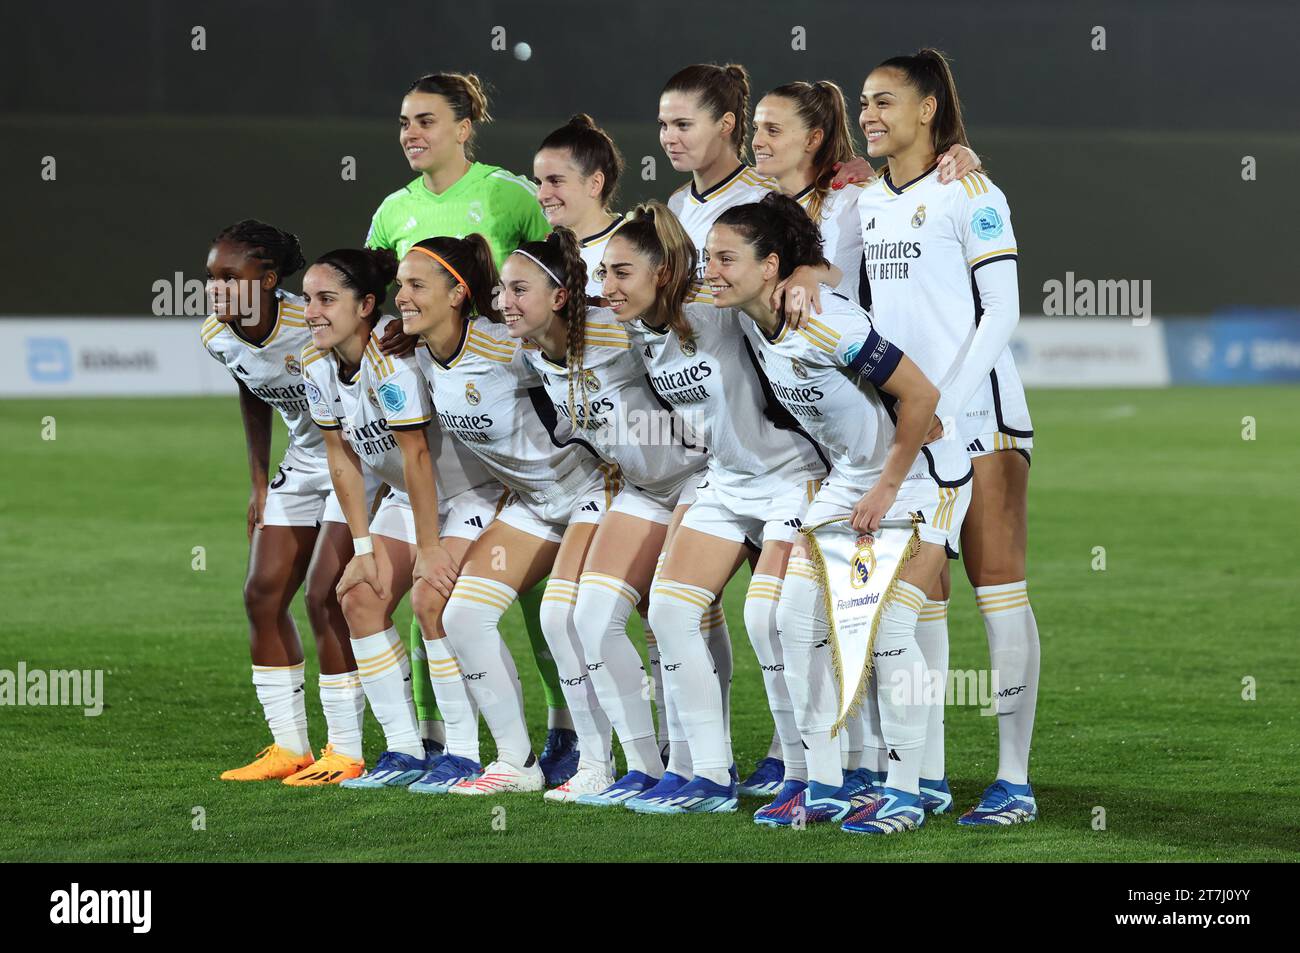 Real Madrid players, back row, from left, Misa Rodriguez, Teresa Abelleira, Signe Bruun, Sandie Toletti and Kathellen. Front row, from left, Linda Caicedo, Oihane Hernandez, Claudia Zornoza, Athenea del Castillo, Olga Carmona and Ivana Andres line up before the UEFA Women's Champions League Group D match at the Estadio Alfredo Di Stefano in Madrid, Spain. Picture date: Wednesday November 15, 2023. Stock Photo